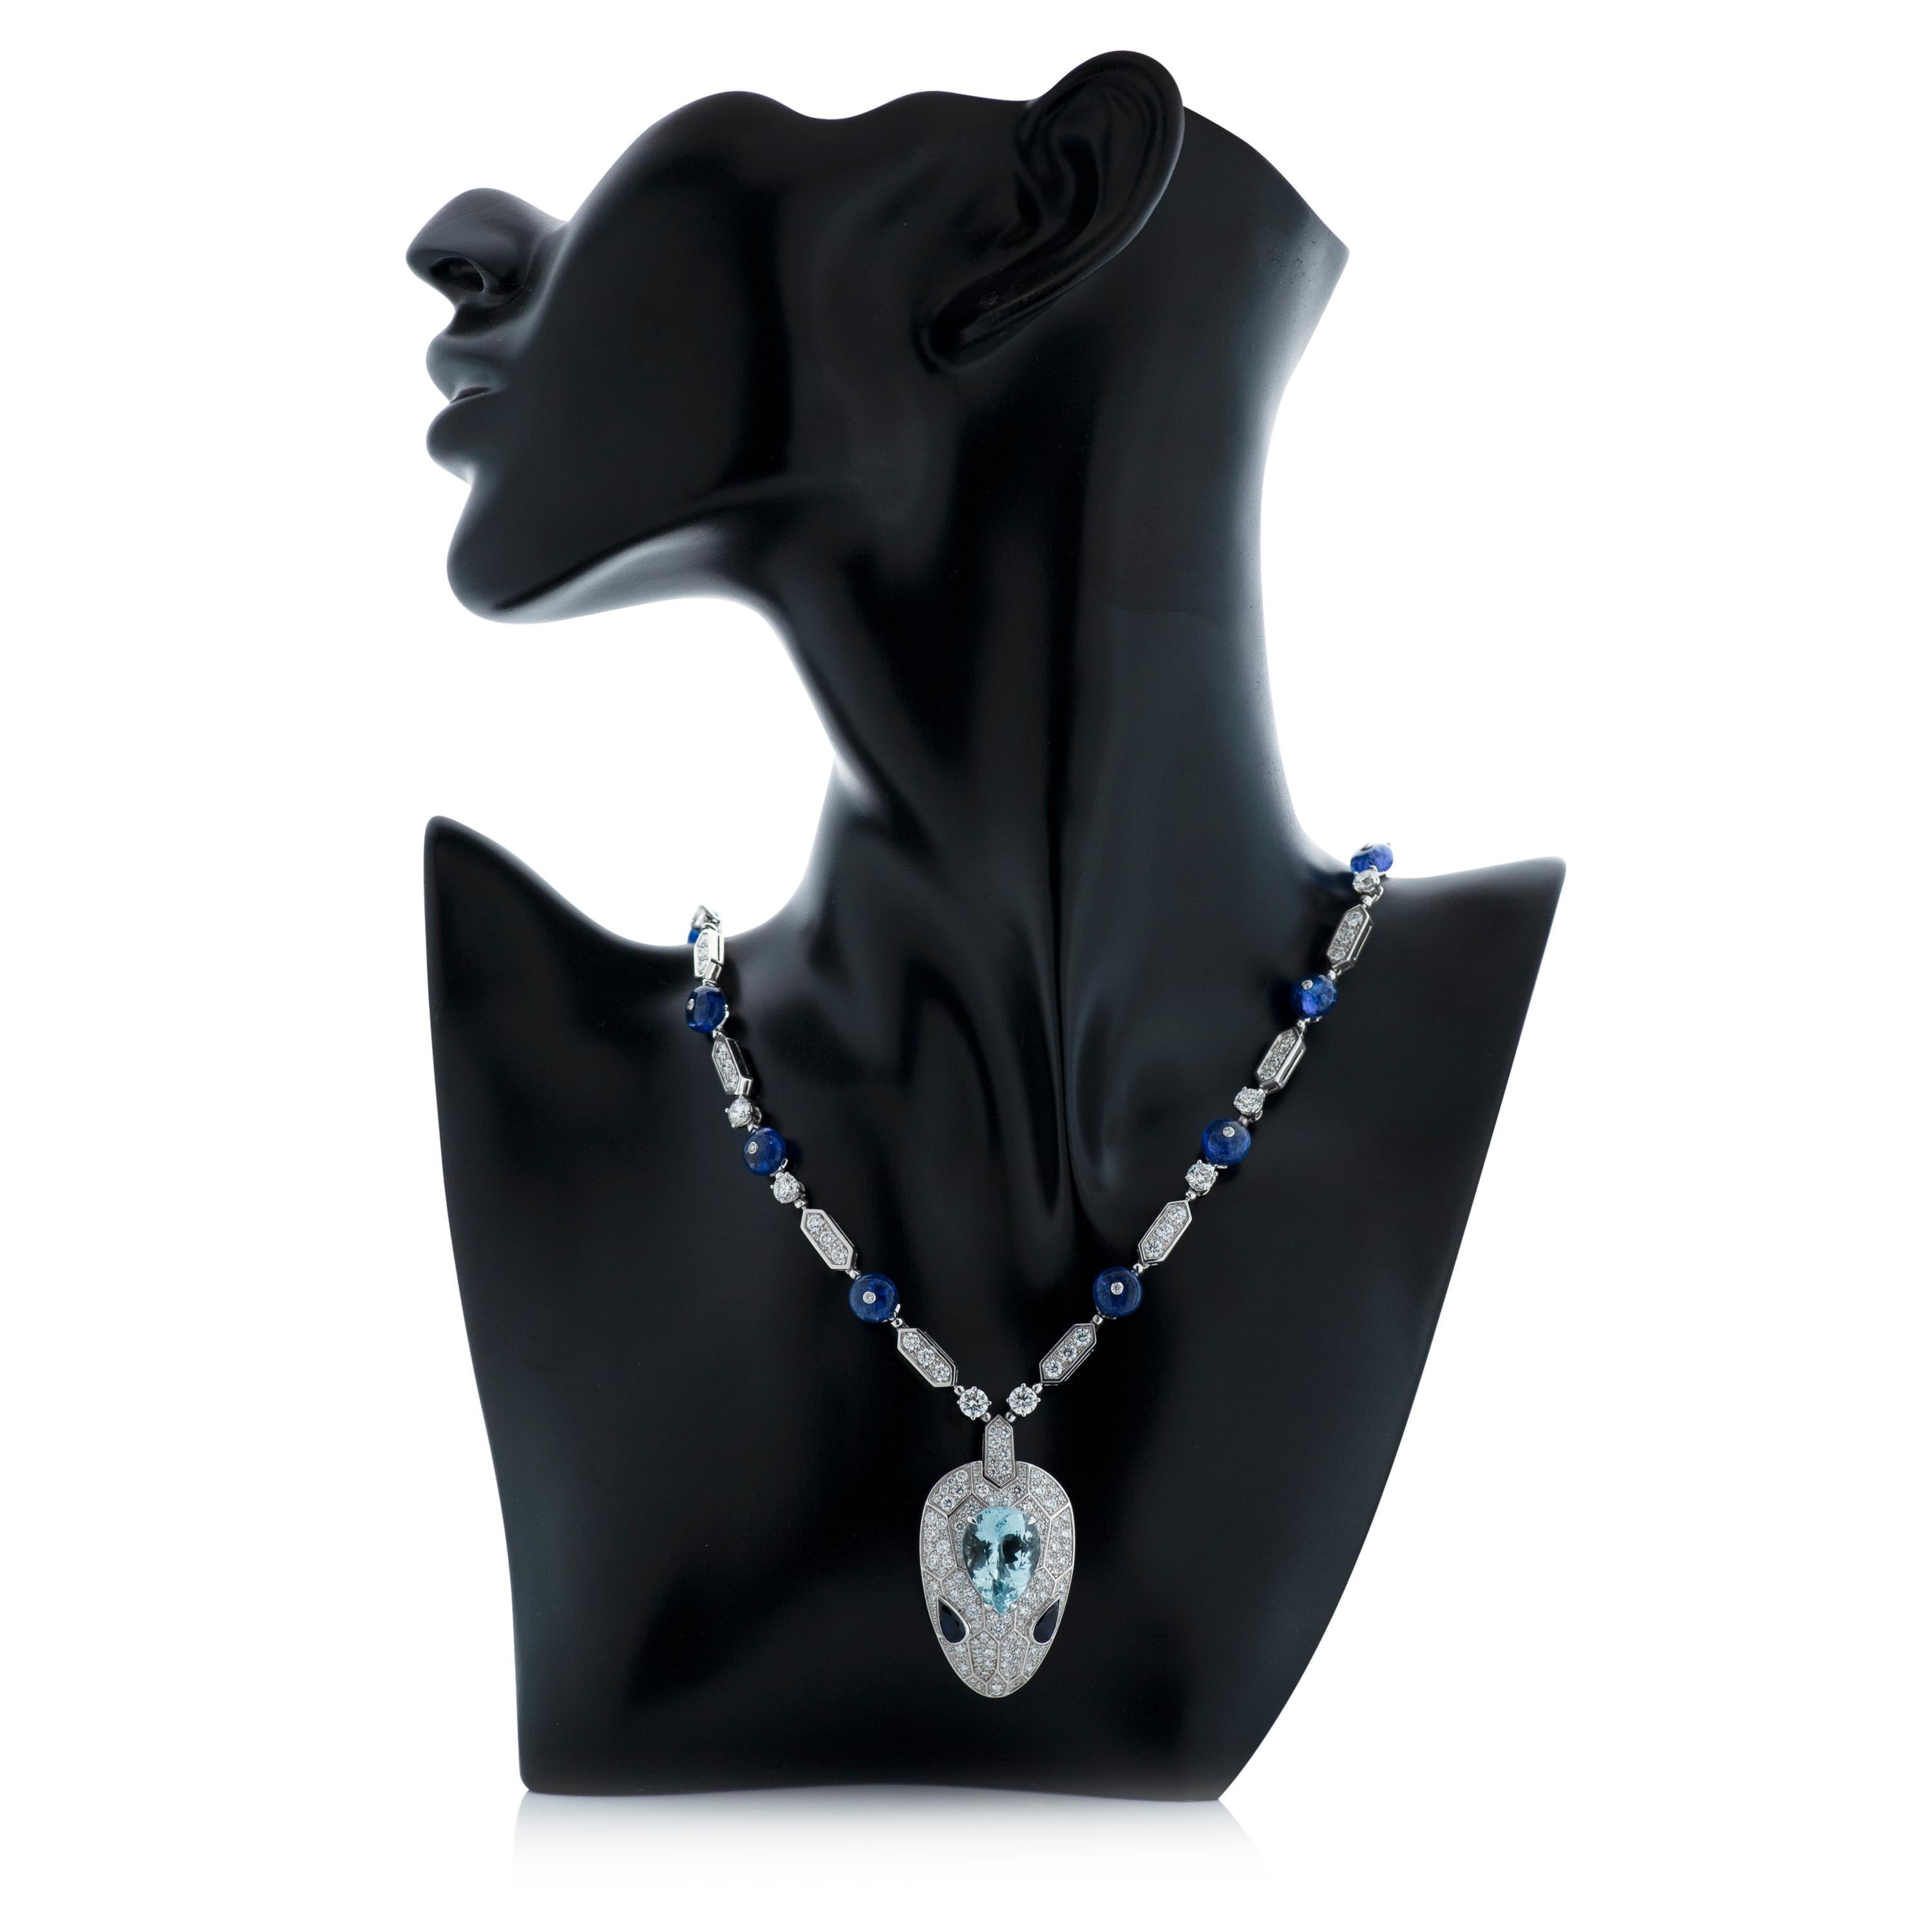 Bulgari Serpenti Seduttori diamond, aquamarine, sapphire and tanzanite snake head necklace in 18k white gold.  Accompanied by Bulgari box and certificate of authenticity. 

The snake head drop measures approximately 46mm long and 25mm wide.  It is